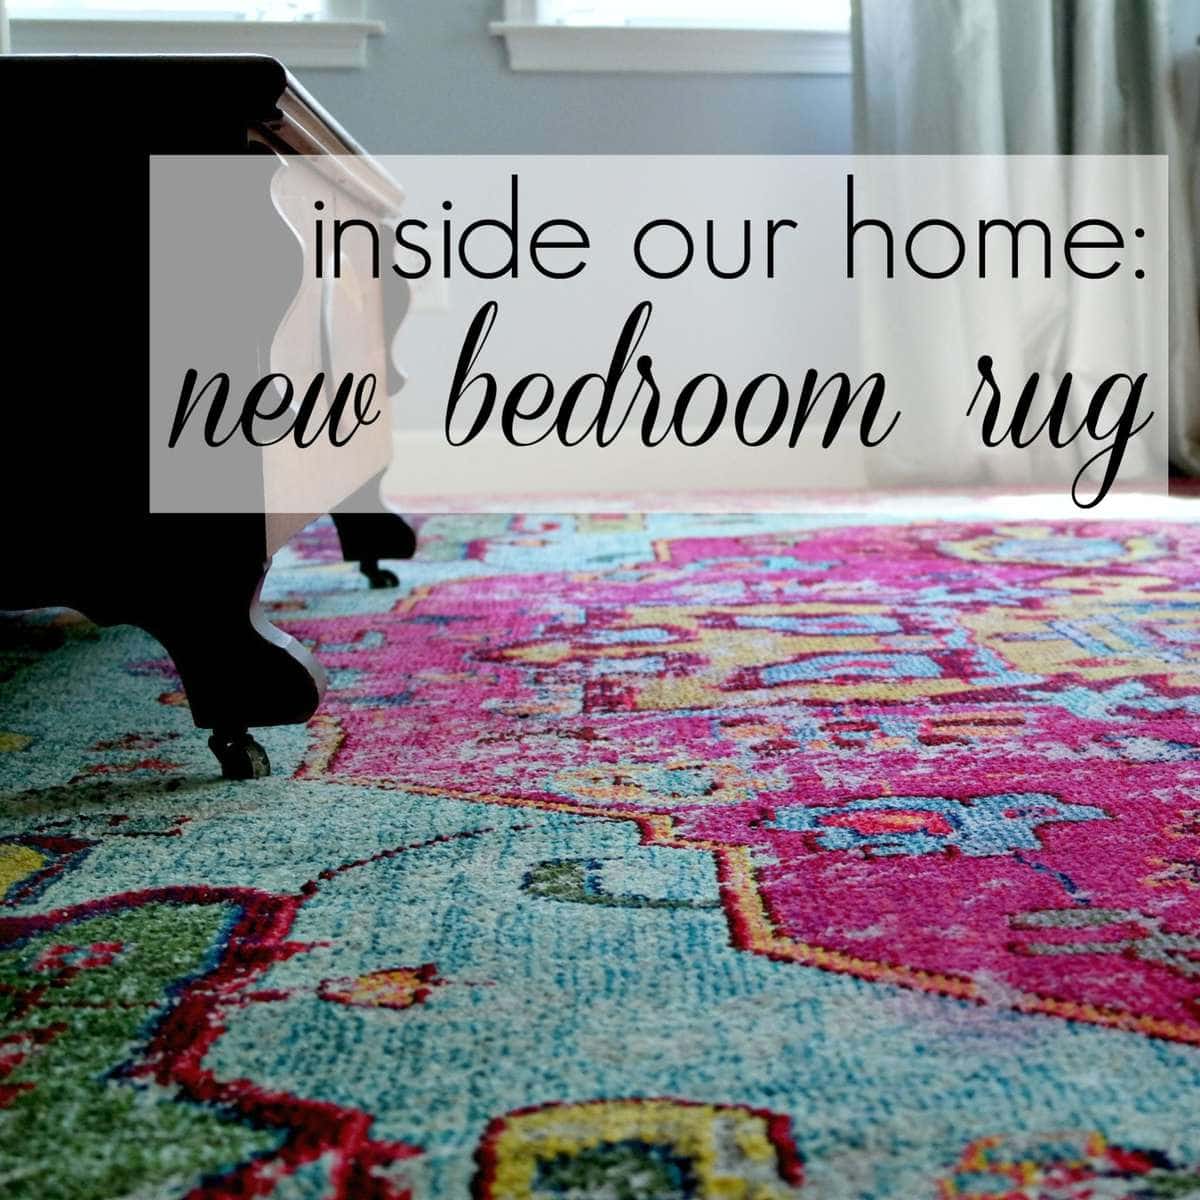 Our New Bedroom Rug from Rugs USA